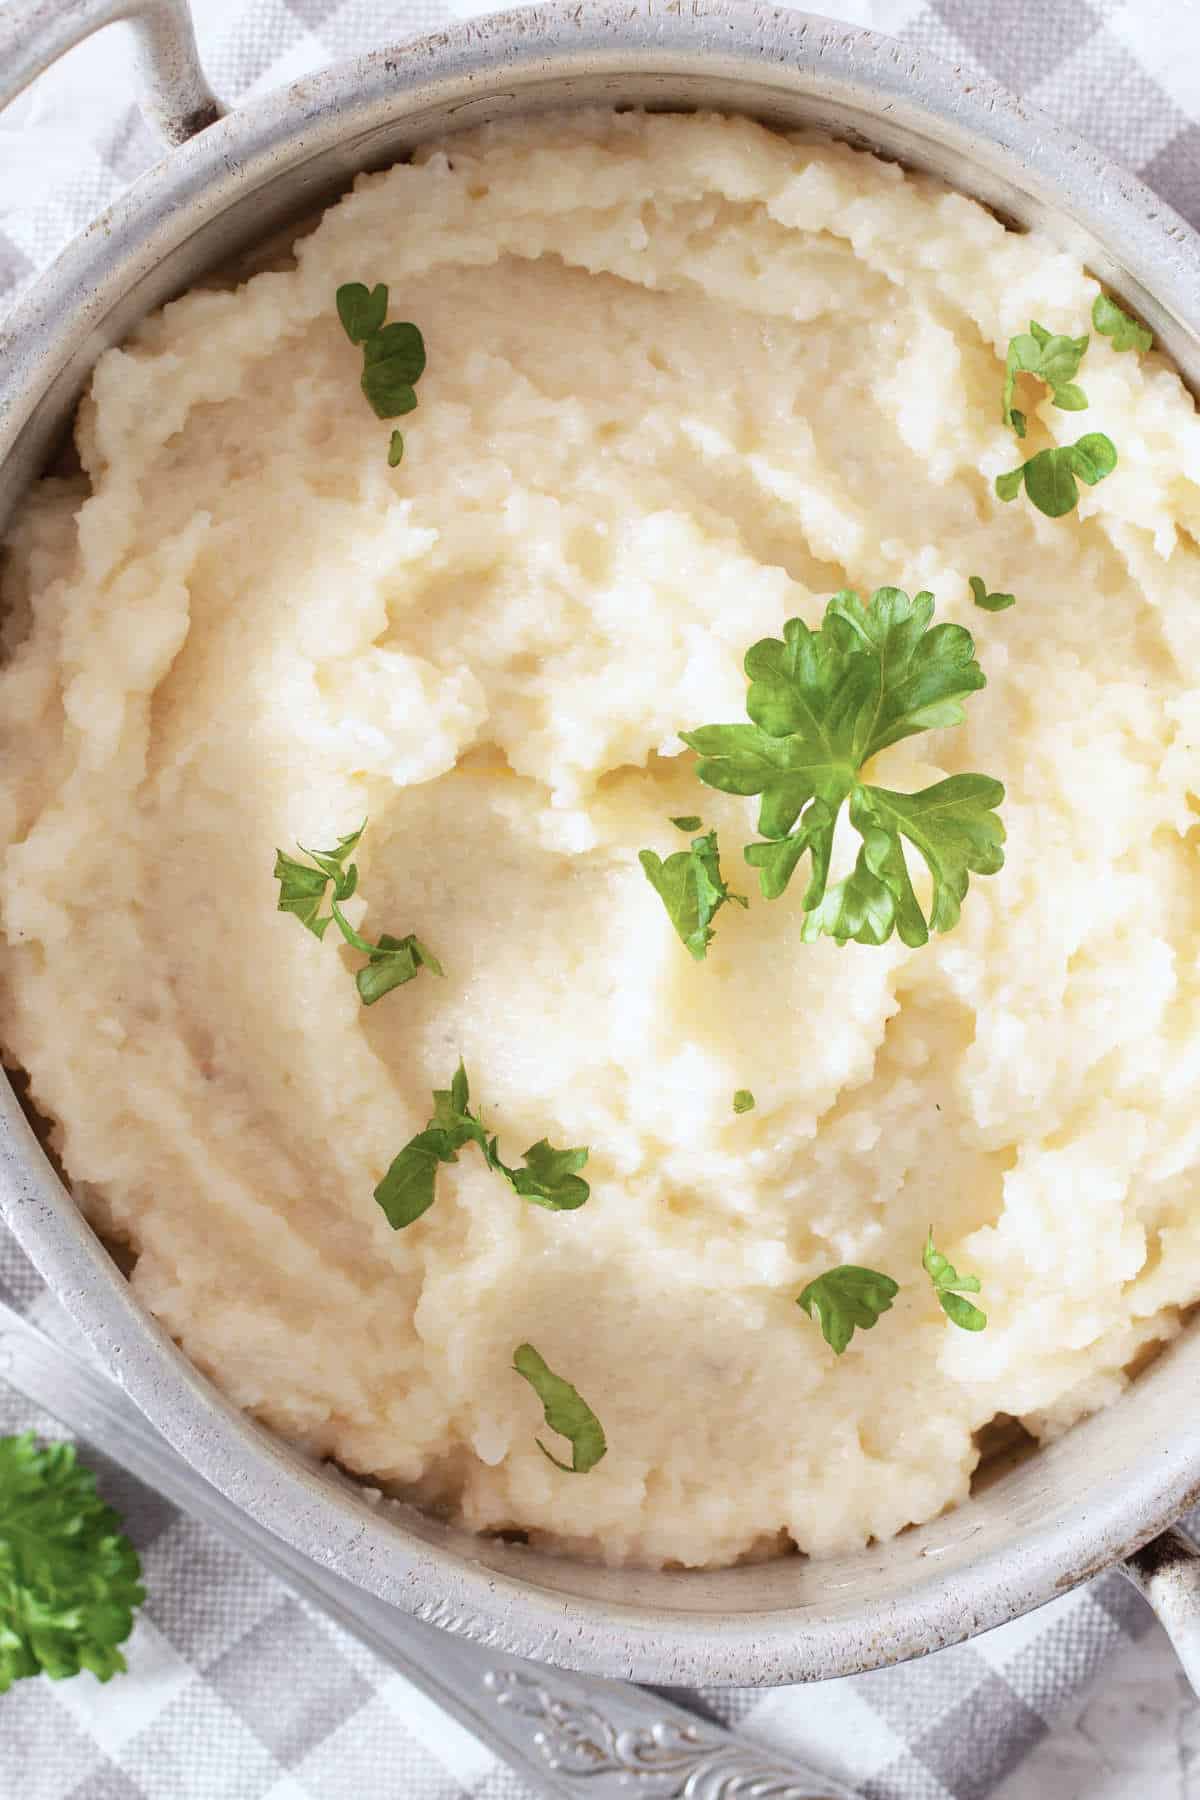 mashed cauliflower with butter. ketogenic paleo diet side dish.